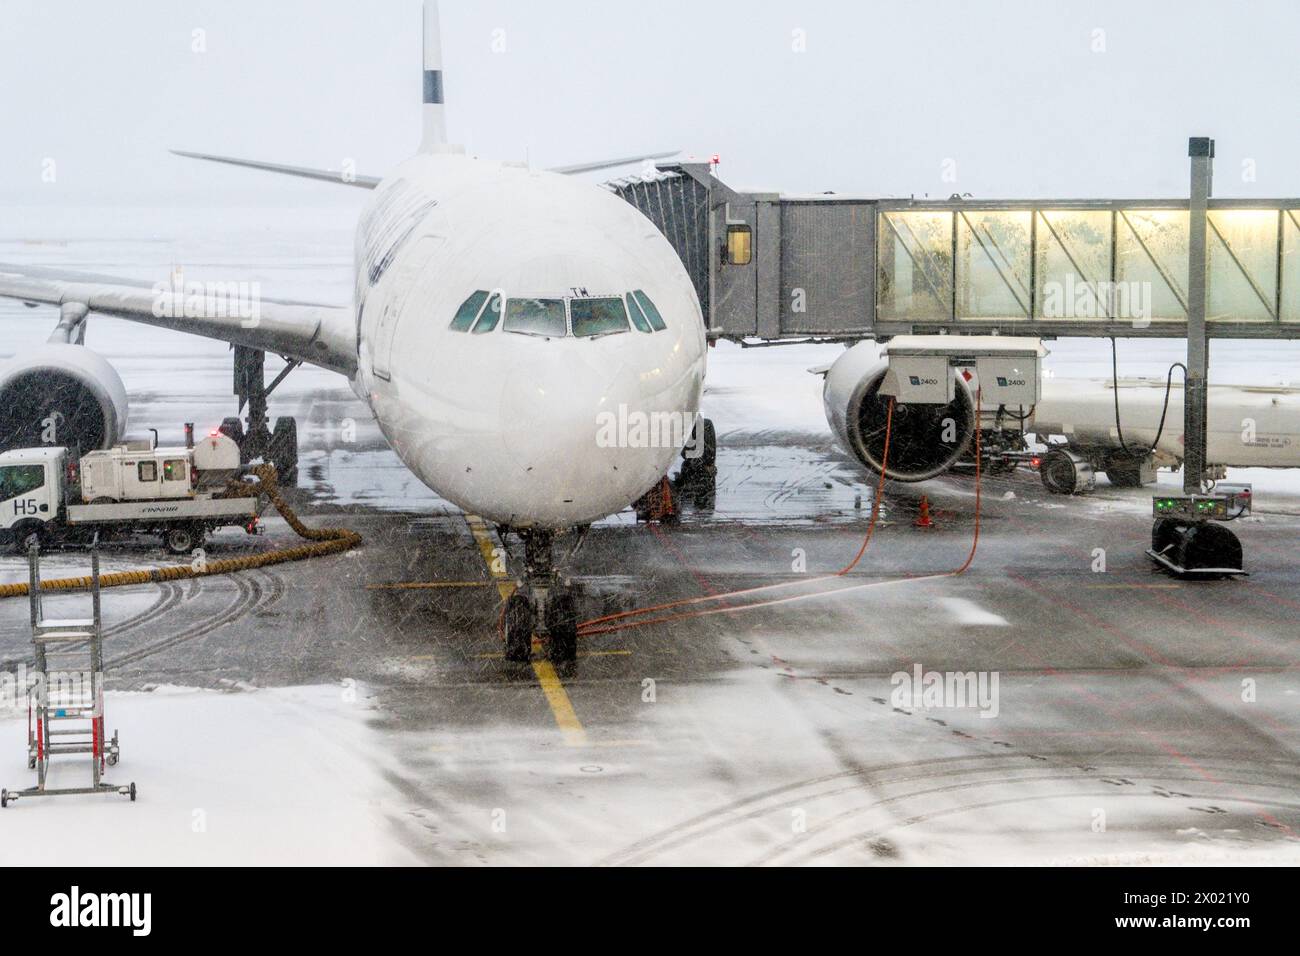 Snowy conditions at Helsinki airport in Finland Stock Photo